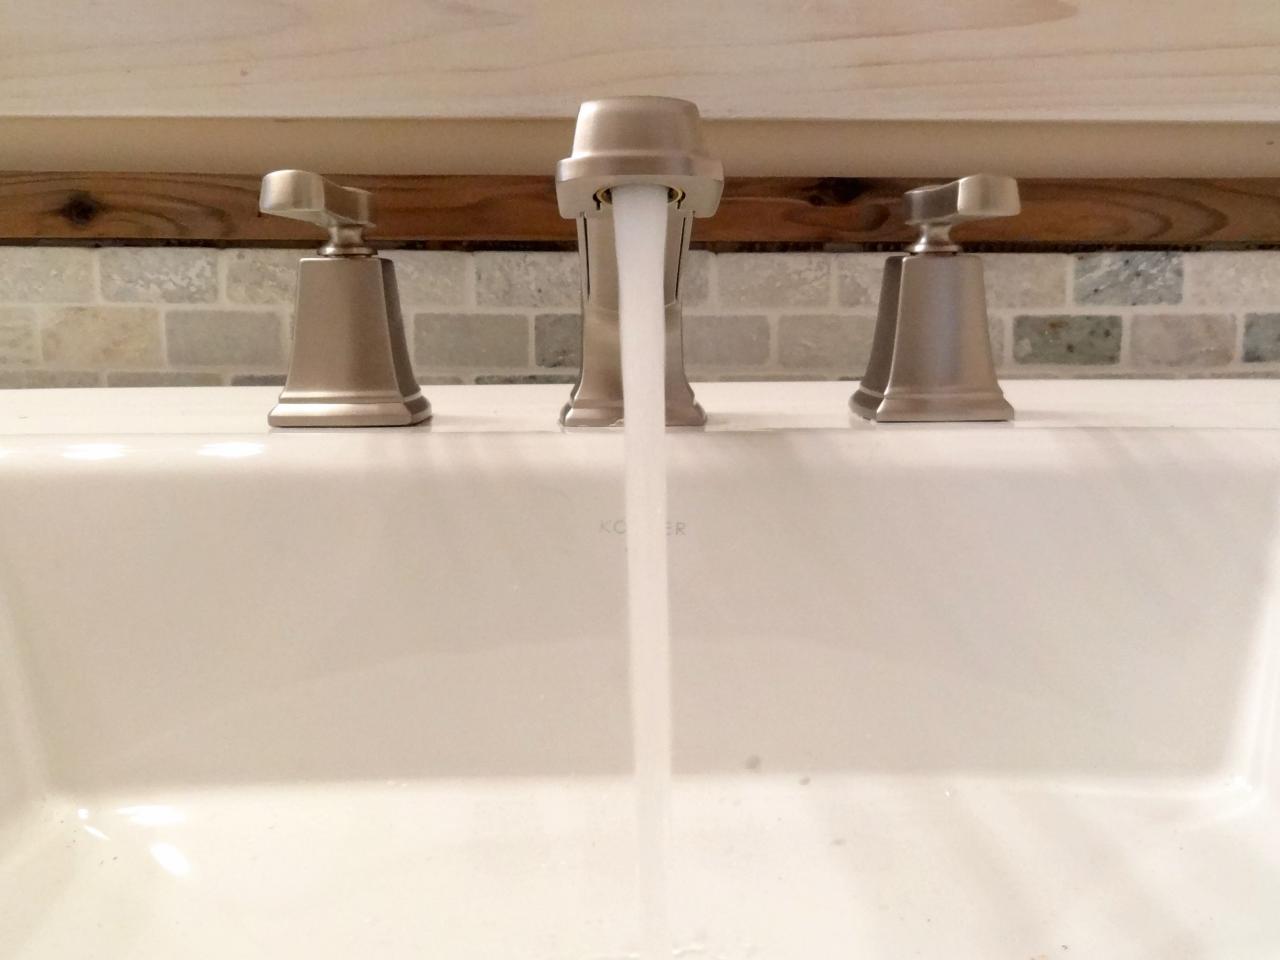 How To Replace A Bathroom Faucet, How To Fix Stuck Bathtub Faucet